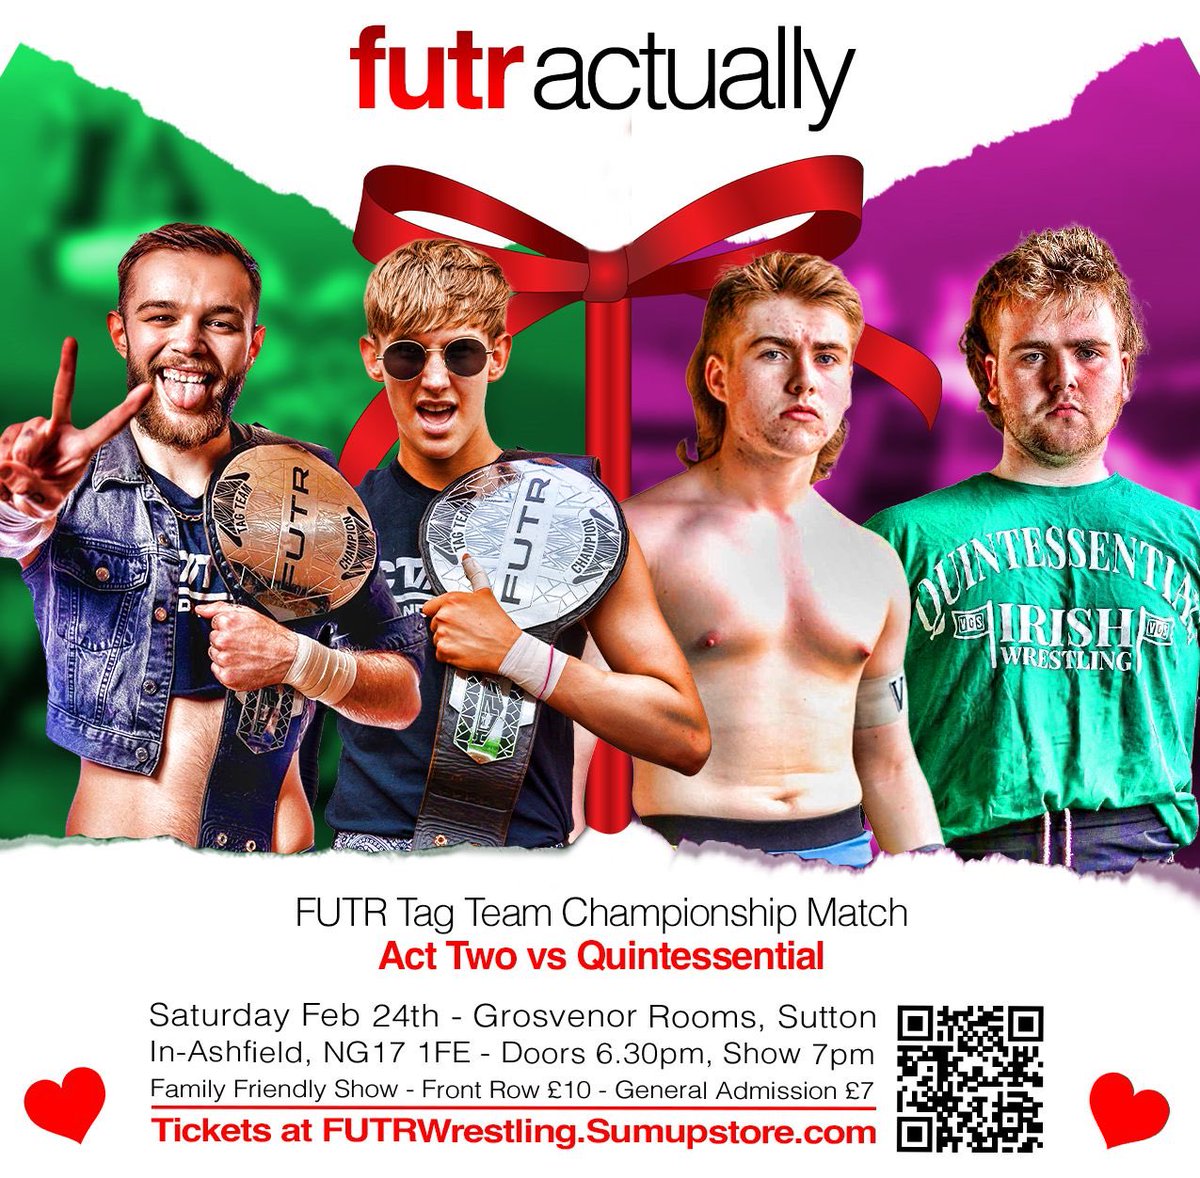 TONIGHT FOR ACT TWO! This is our first standard 2 vs 2 tag team match at @FutrWrestling since June 2023. We have had some of our biggest opportunities of our careers since then. We are a completely different team than we were 8 months ago, and we will show you why tonight.